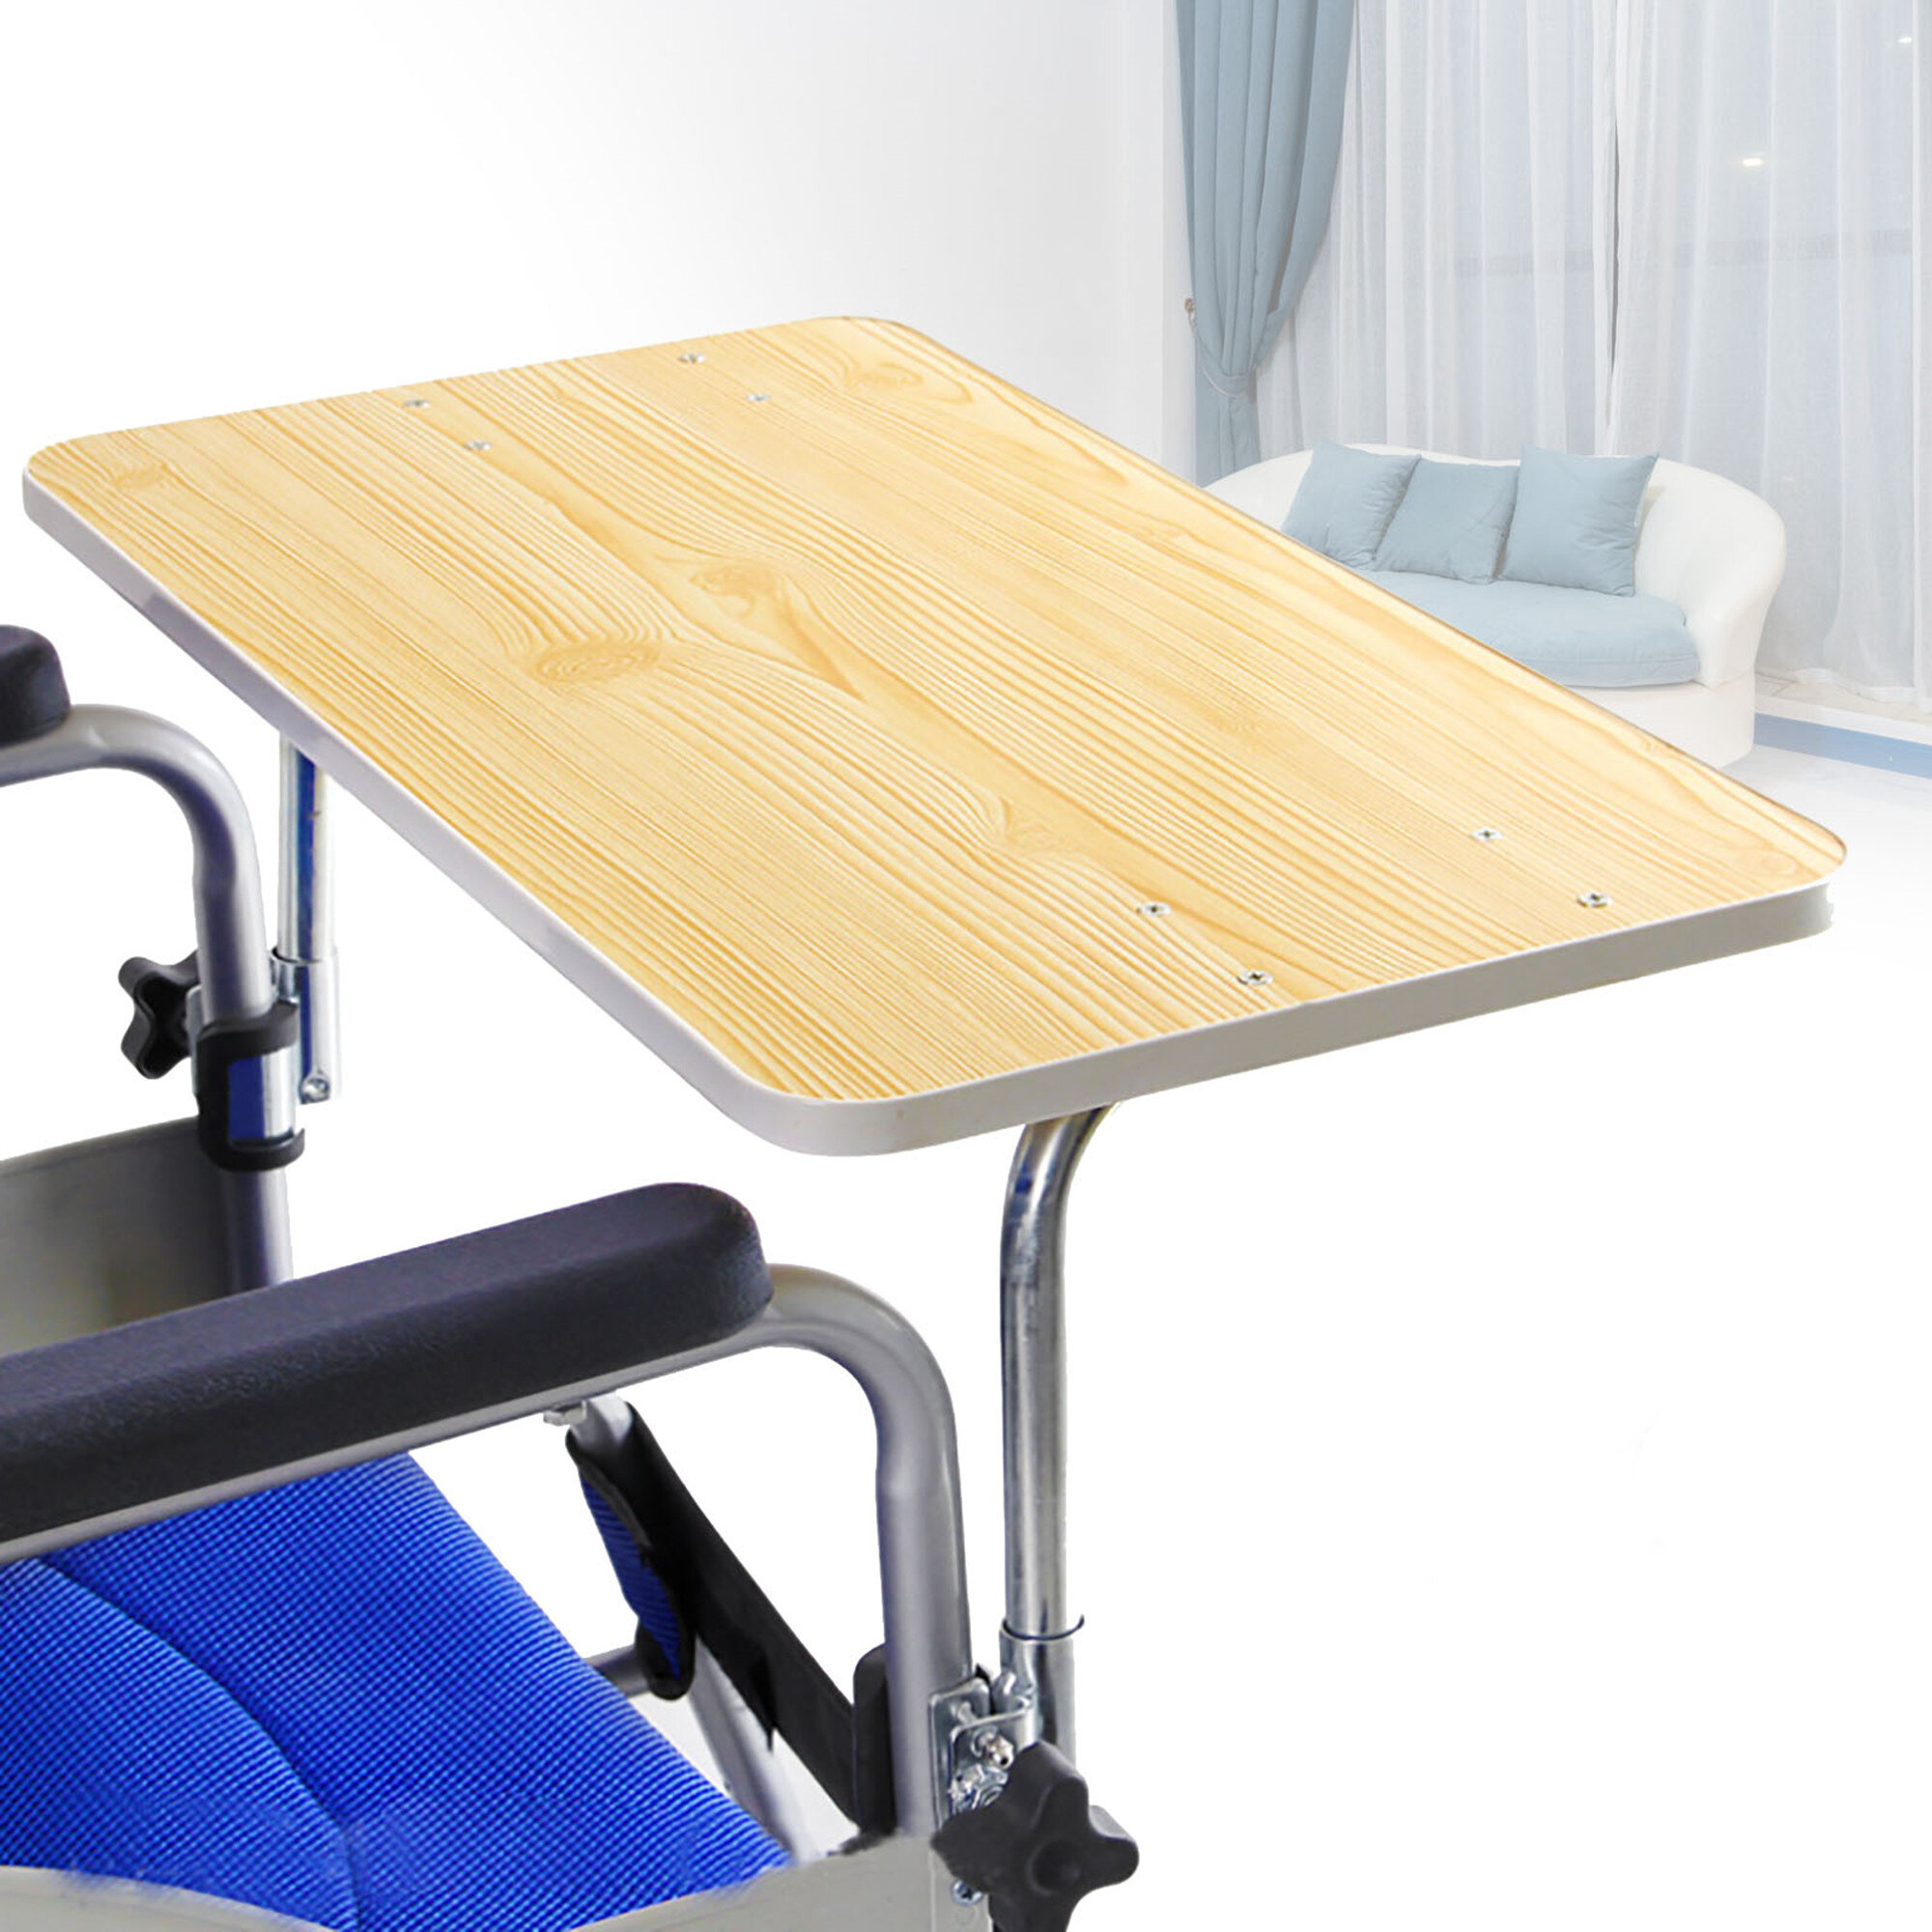 FRONG 22.44'' Rectangular Portable Folding Table For Wheelchairs